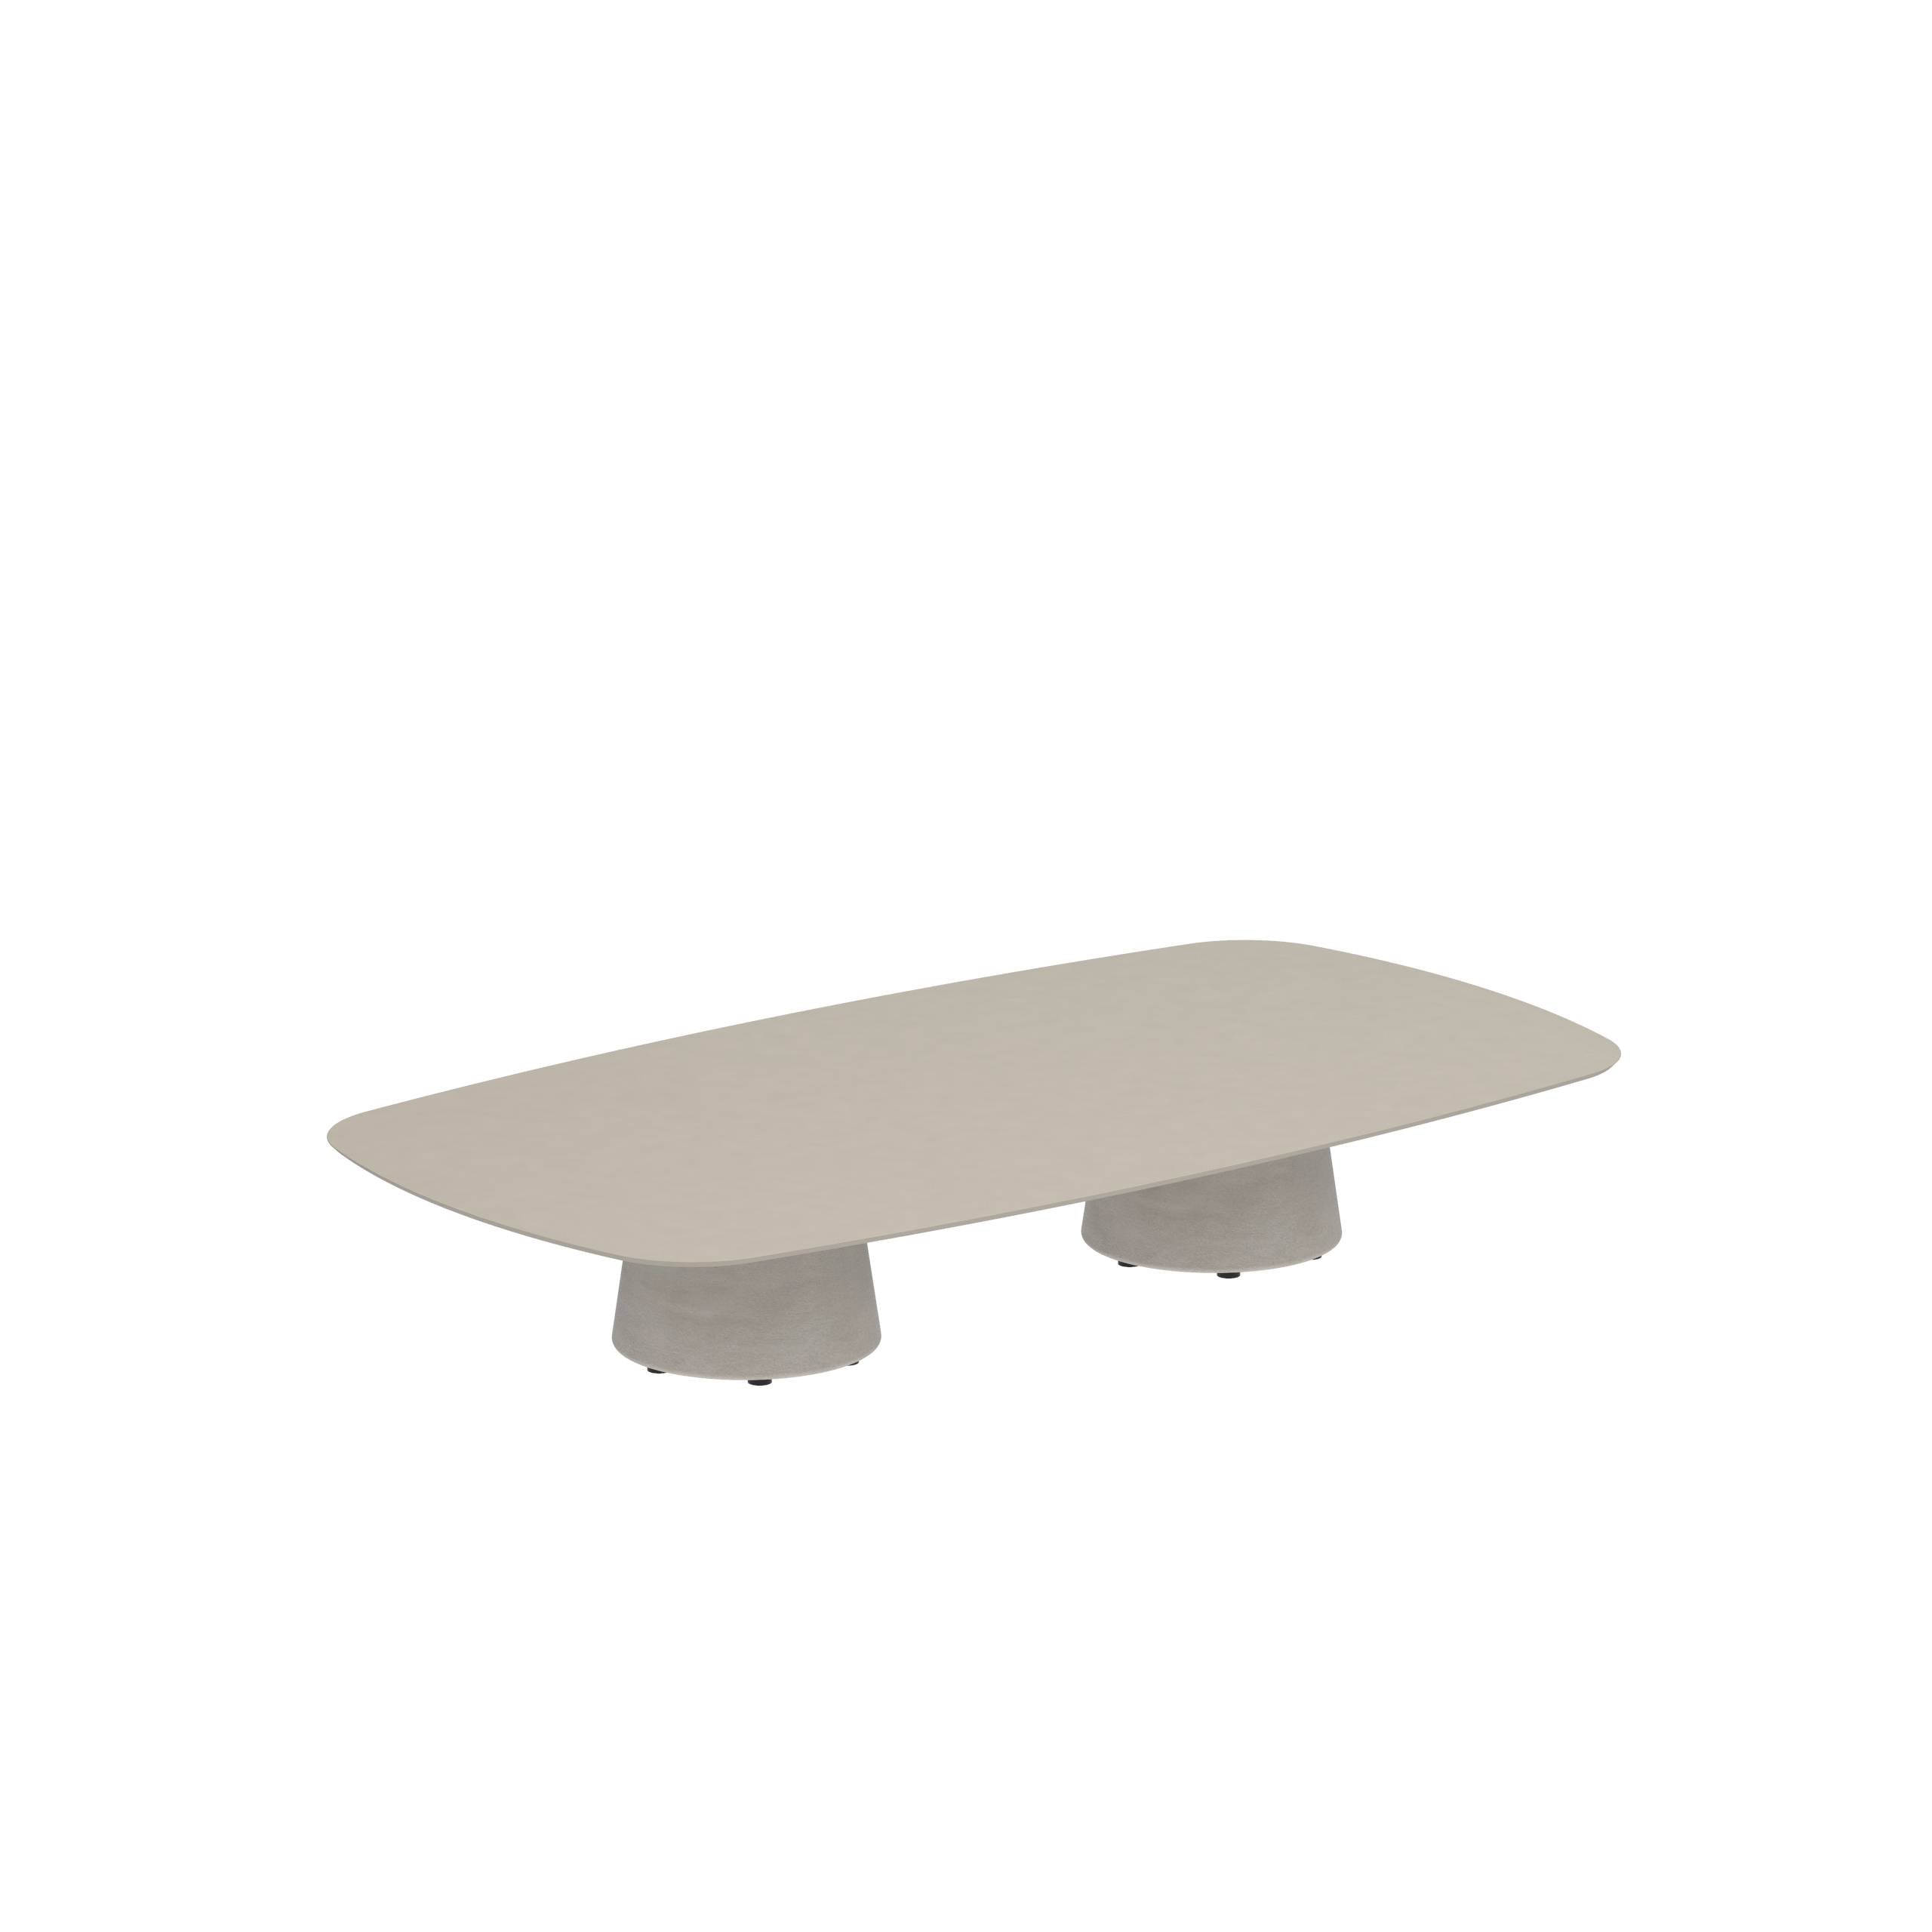 Conix Table 220x120 Cm Low Lounge Legs Concrete Cement Grey - Table Top Ceramic Pearl Grey